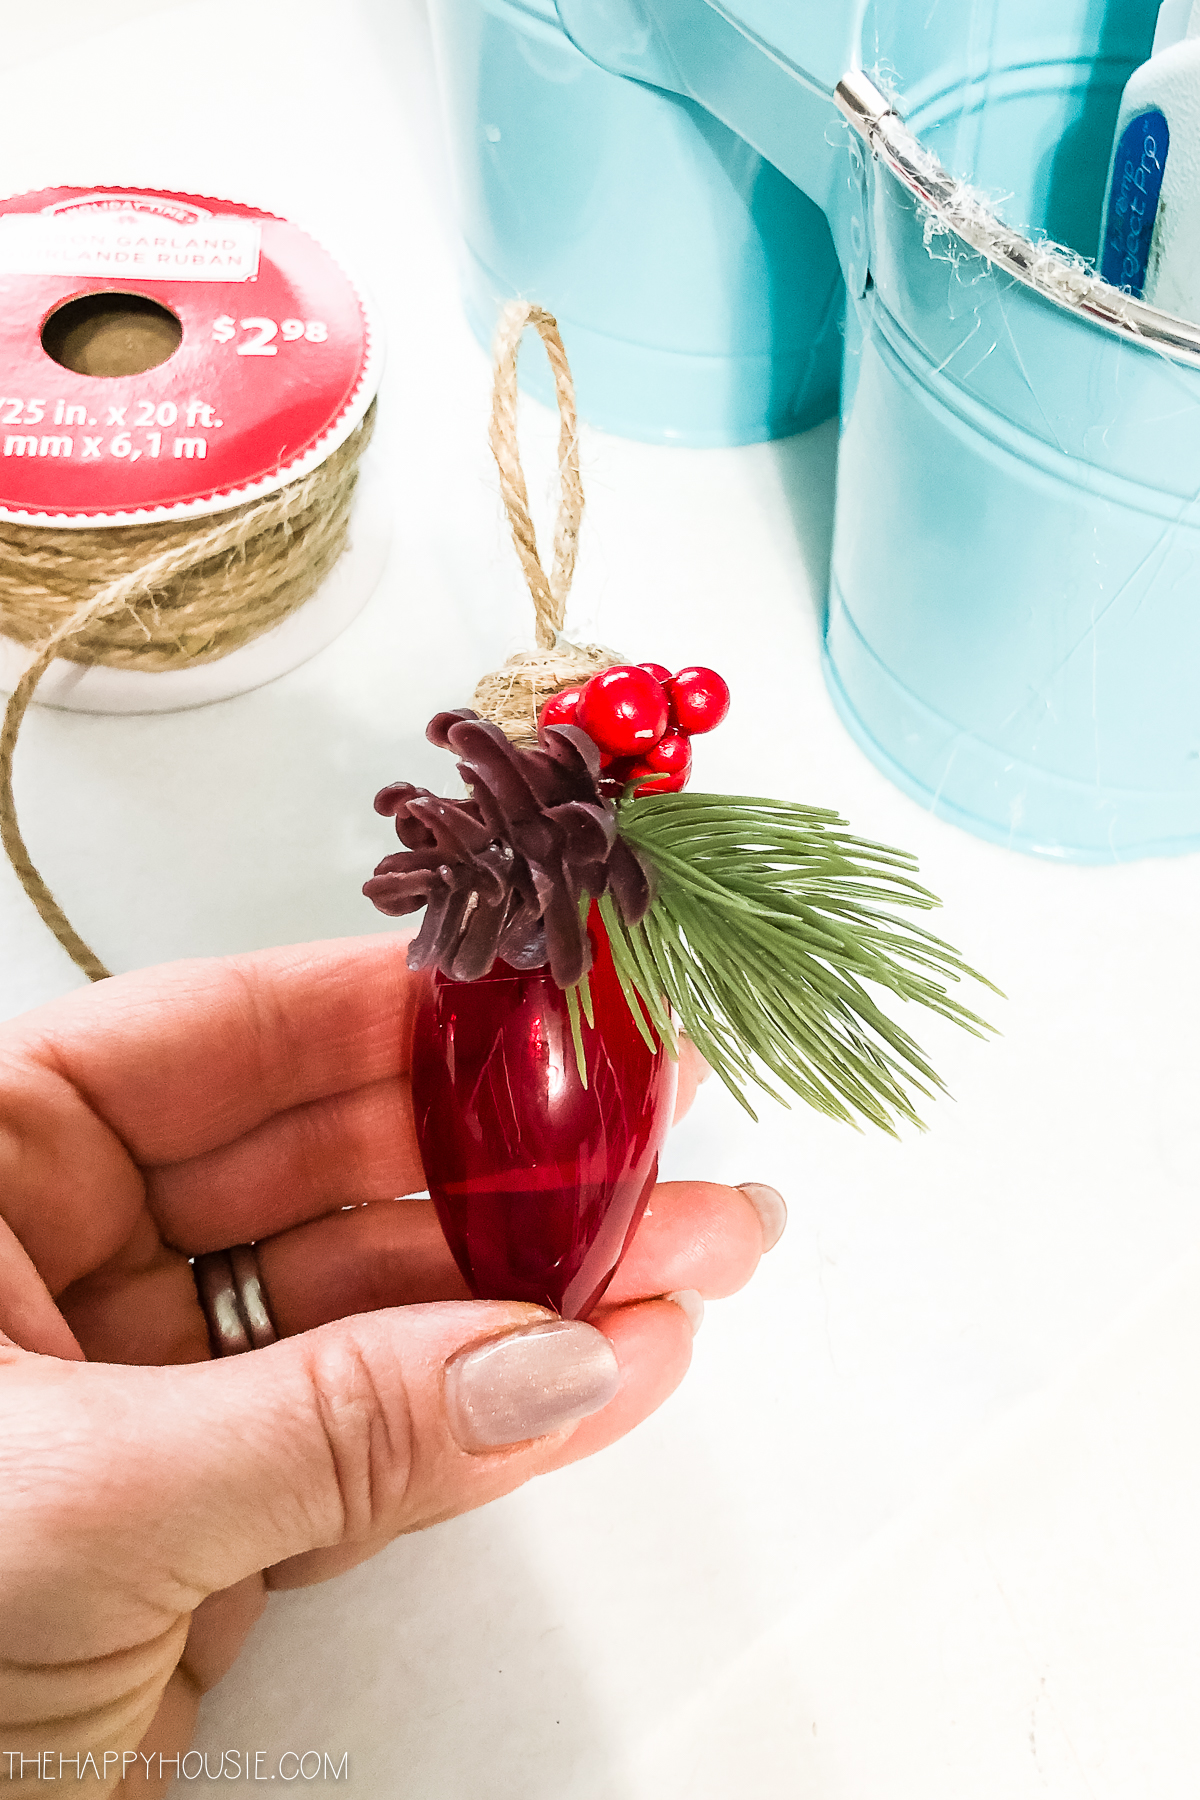 Holding the ornament in the hand with red berries on it.